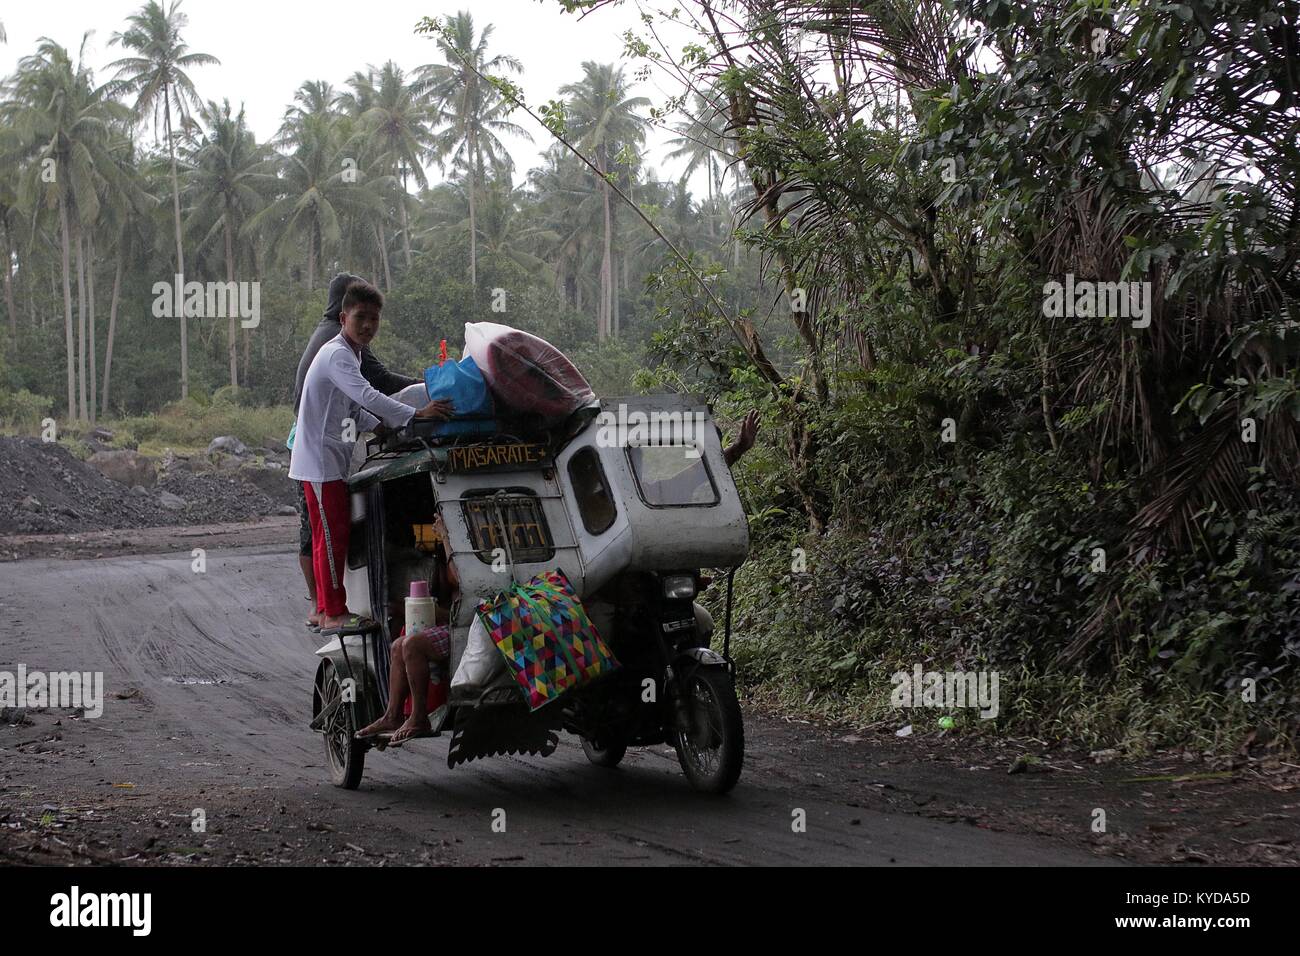 Albay, Philippines. 14th Jan, 2018. Residents flee with belongings on board a tricycle as they move to an evacuation center in Albay Province, the Philippines, Jan. 14, 2018. Nearly a thousand families living close to the Mayon Volcano evacuated from their homes as Philippine authorities raised its alert level of the Mayon volcano on Sunday for the second time in less than 24 hours from 'increasing unrest' to 'increased tendency towards eruption' within weeks or even days. Credit: Stringer/Xinhua/Alamy Live News Stock Photo